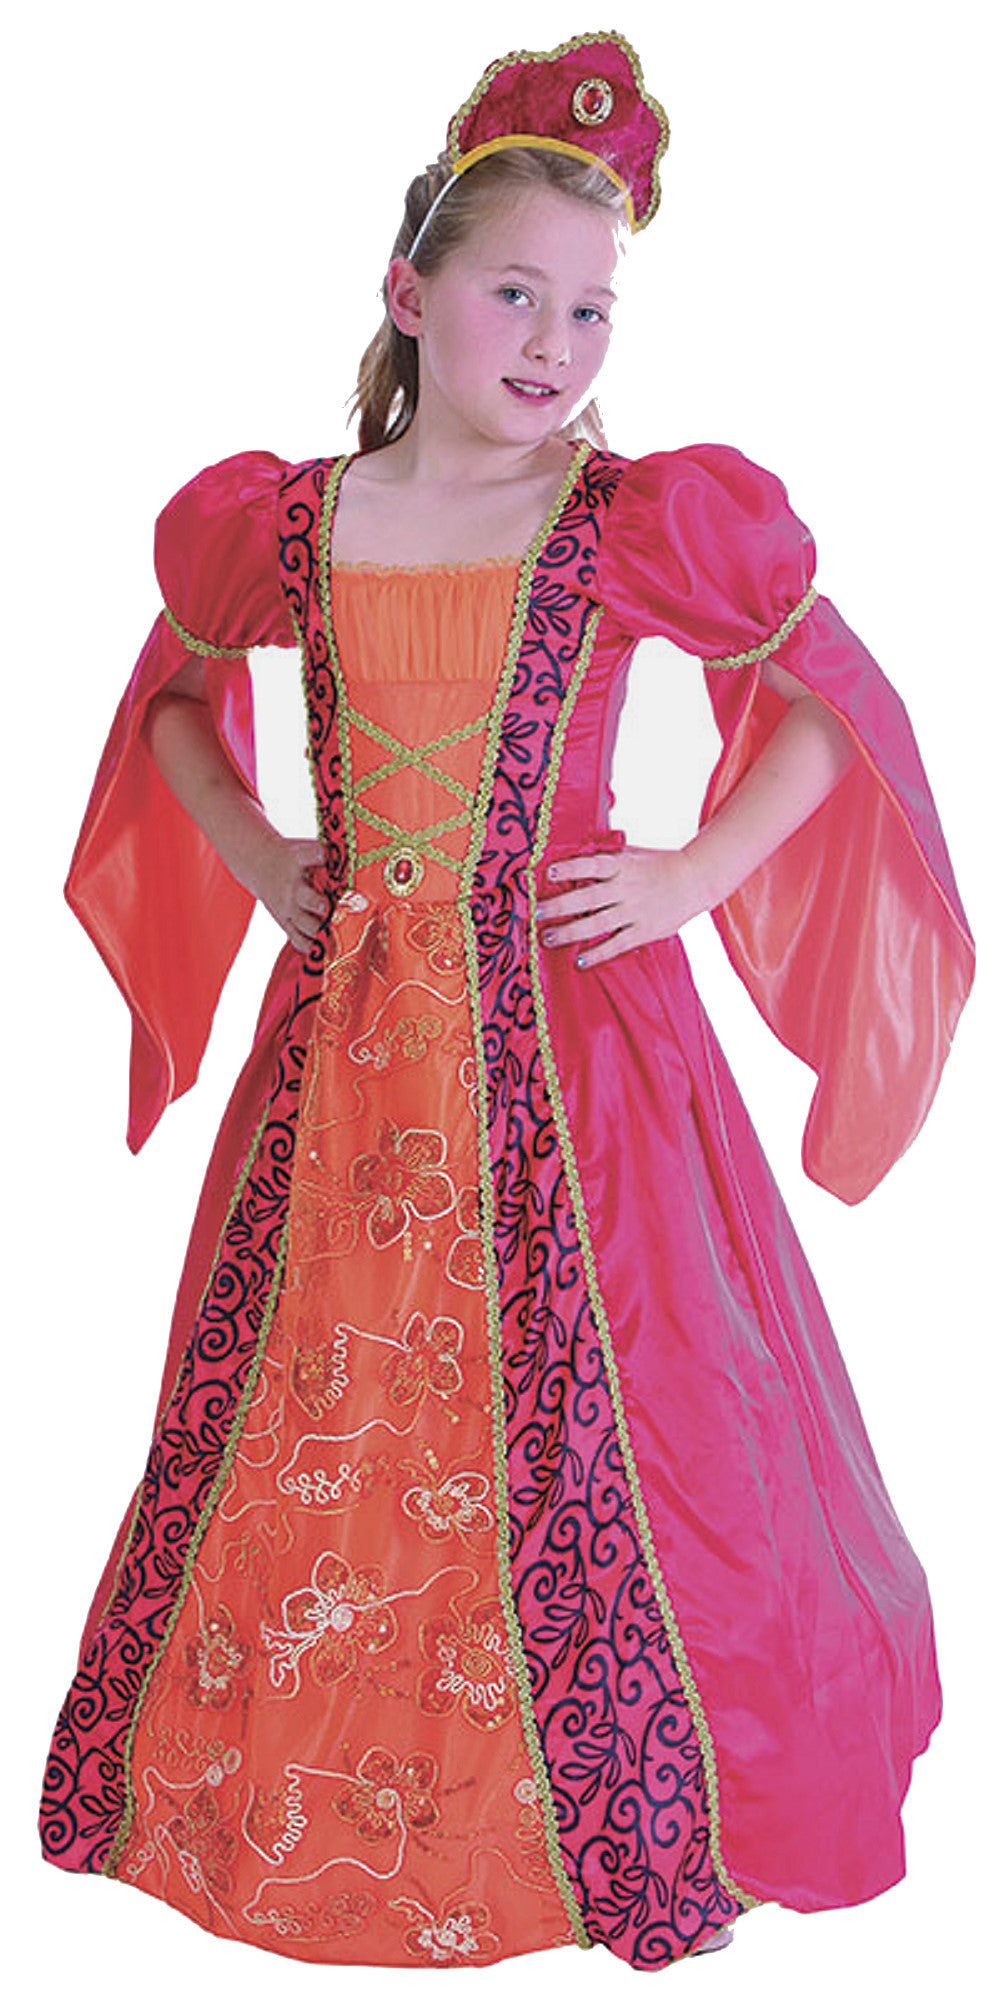 Elizabethan Princess Girl’s Fancy Dress Costume Ages 3-5 Available